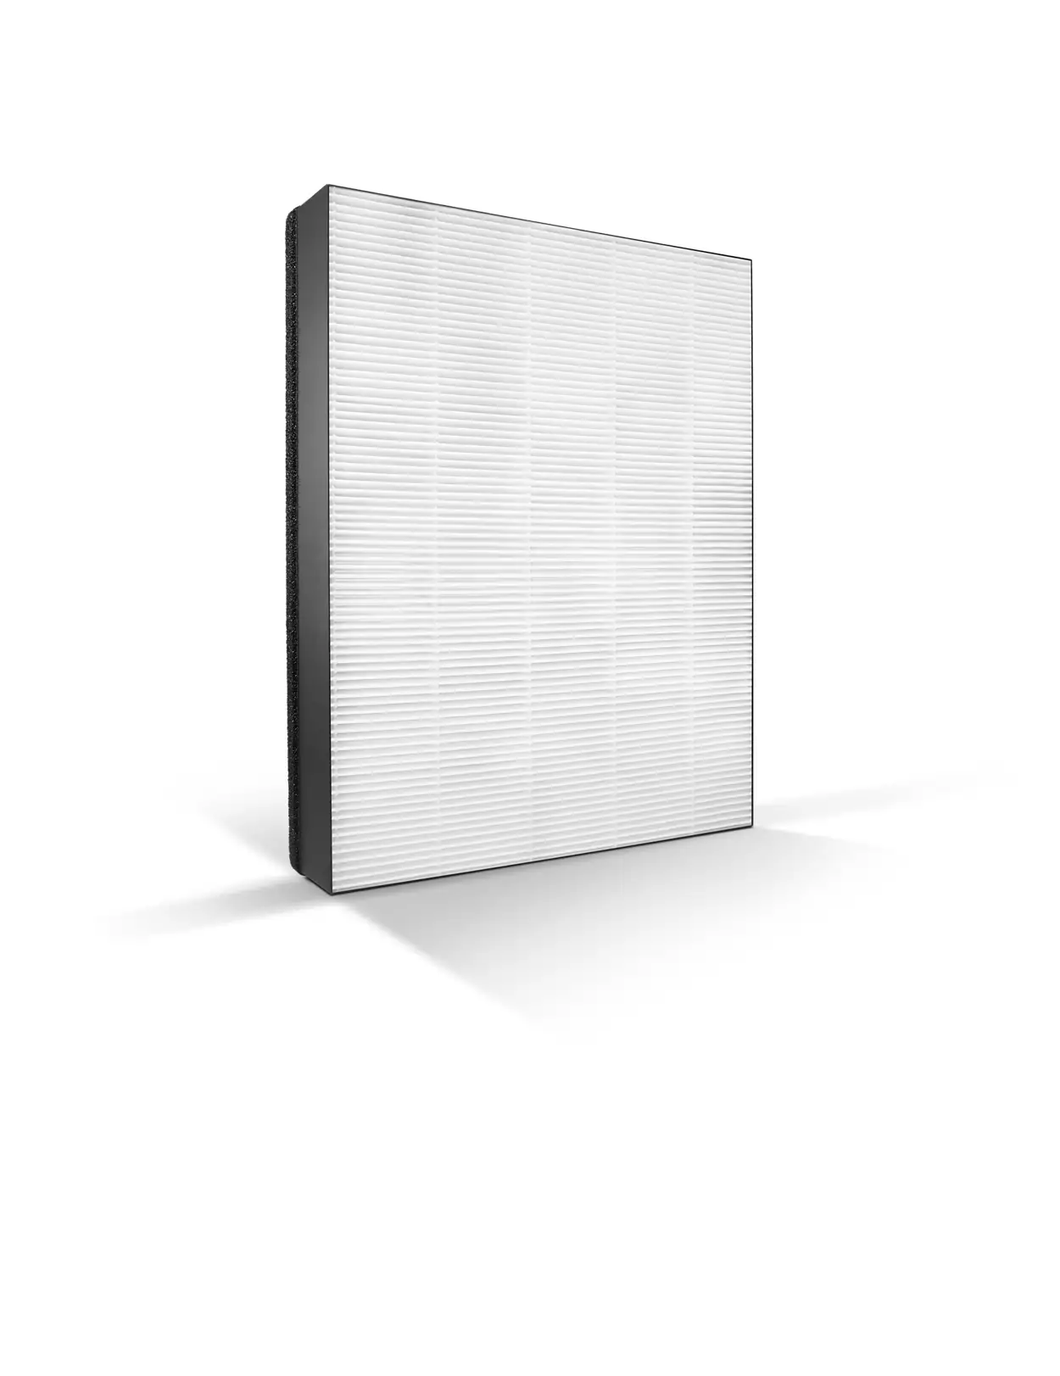 Philips NanoProtect HEPA filter FY2422 for Air Purifier AC2880 AC2882 AC2885 AC2887 AC2888 AC2889 AC2892 AC3821